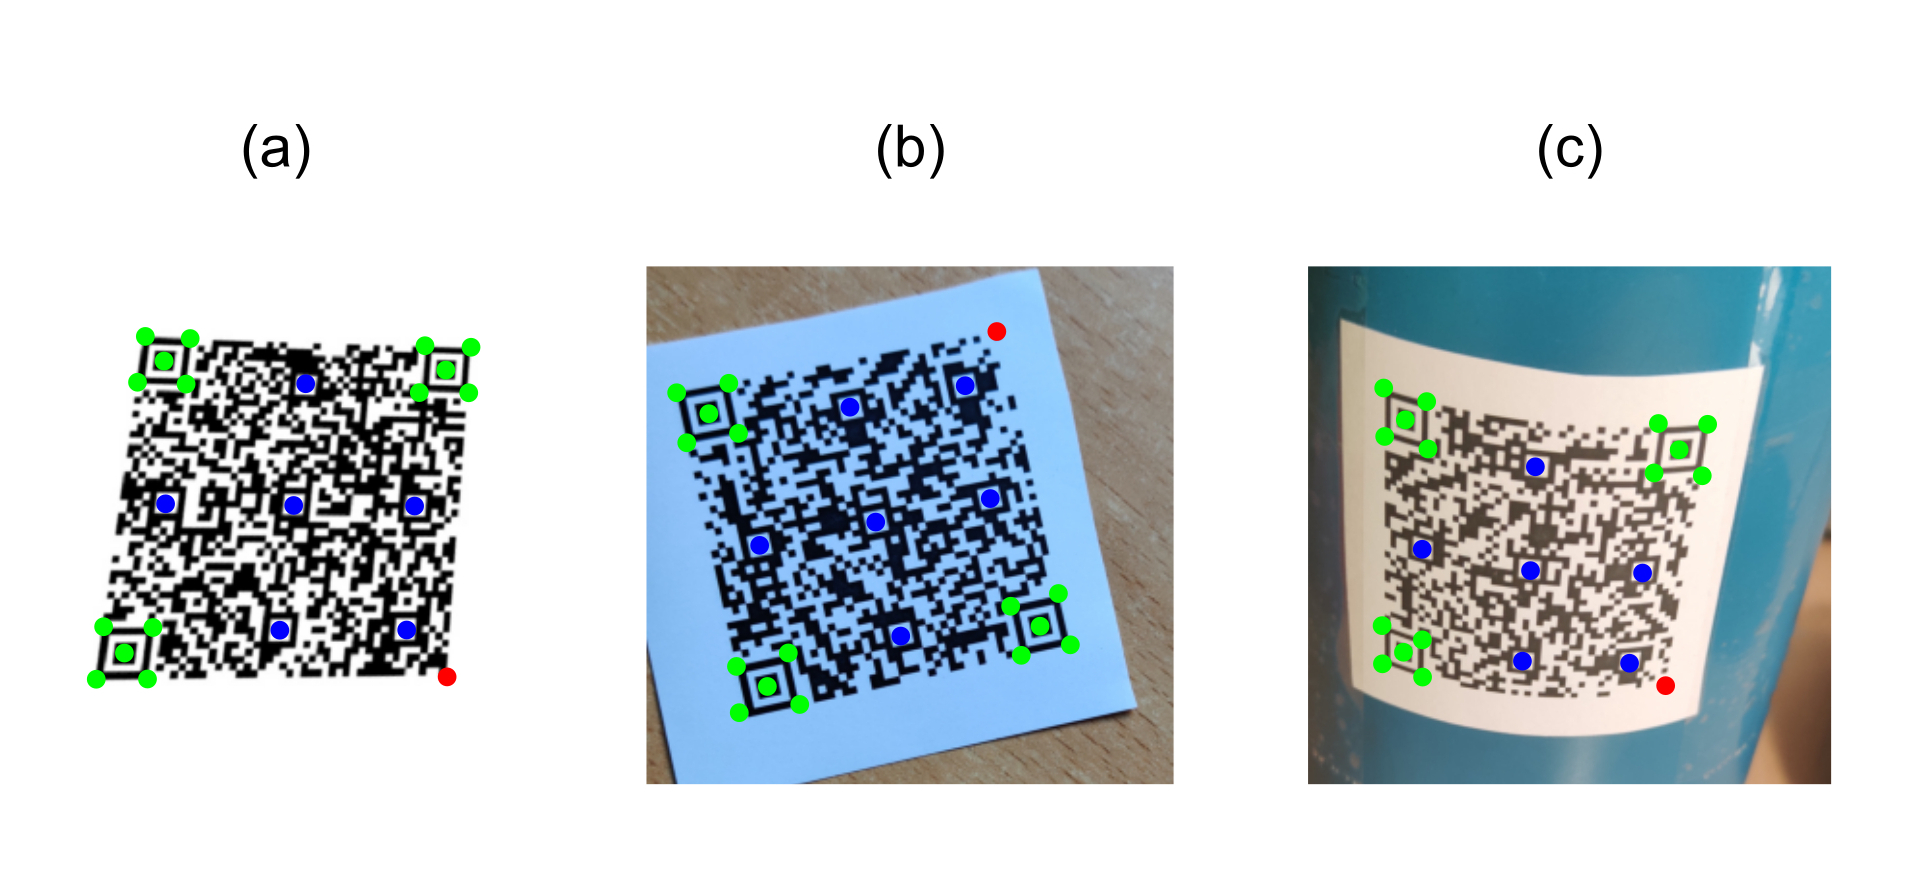 Example images from the three datasets - (a) SYNT, (b) FLAT and (c) SURF - showing similar QR codes in different surface deformations. All images show the extracted features: (green) the finder patterns, (blue) the alignment patterns and (red) the fourth corner. 